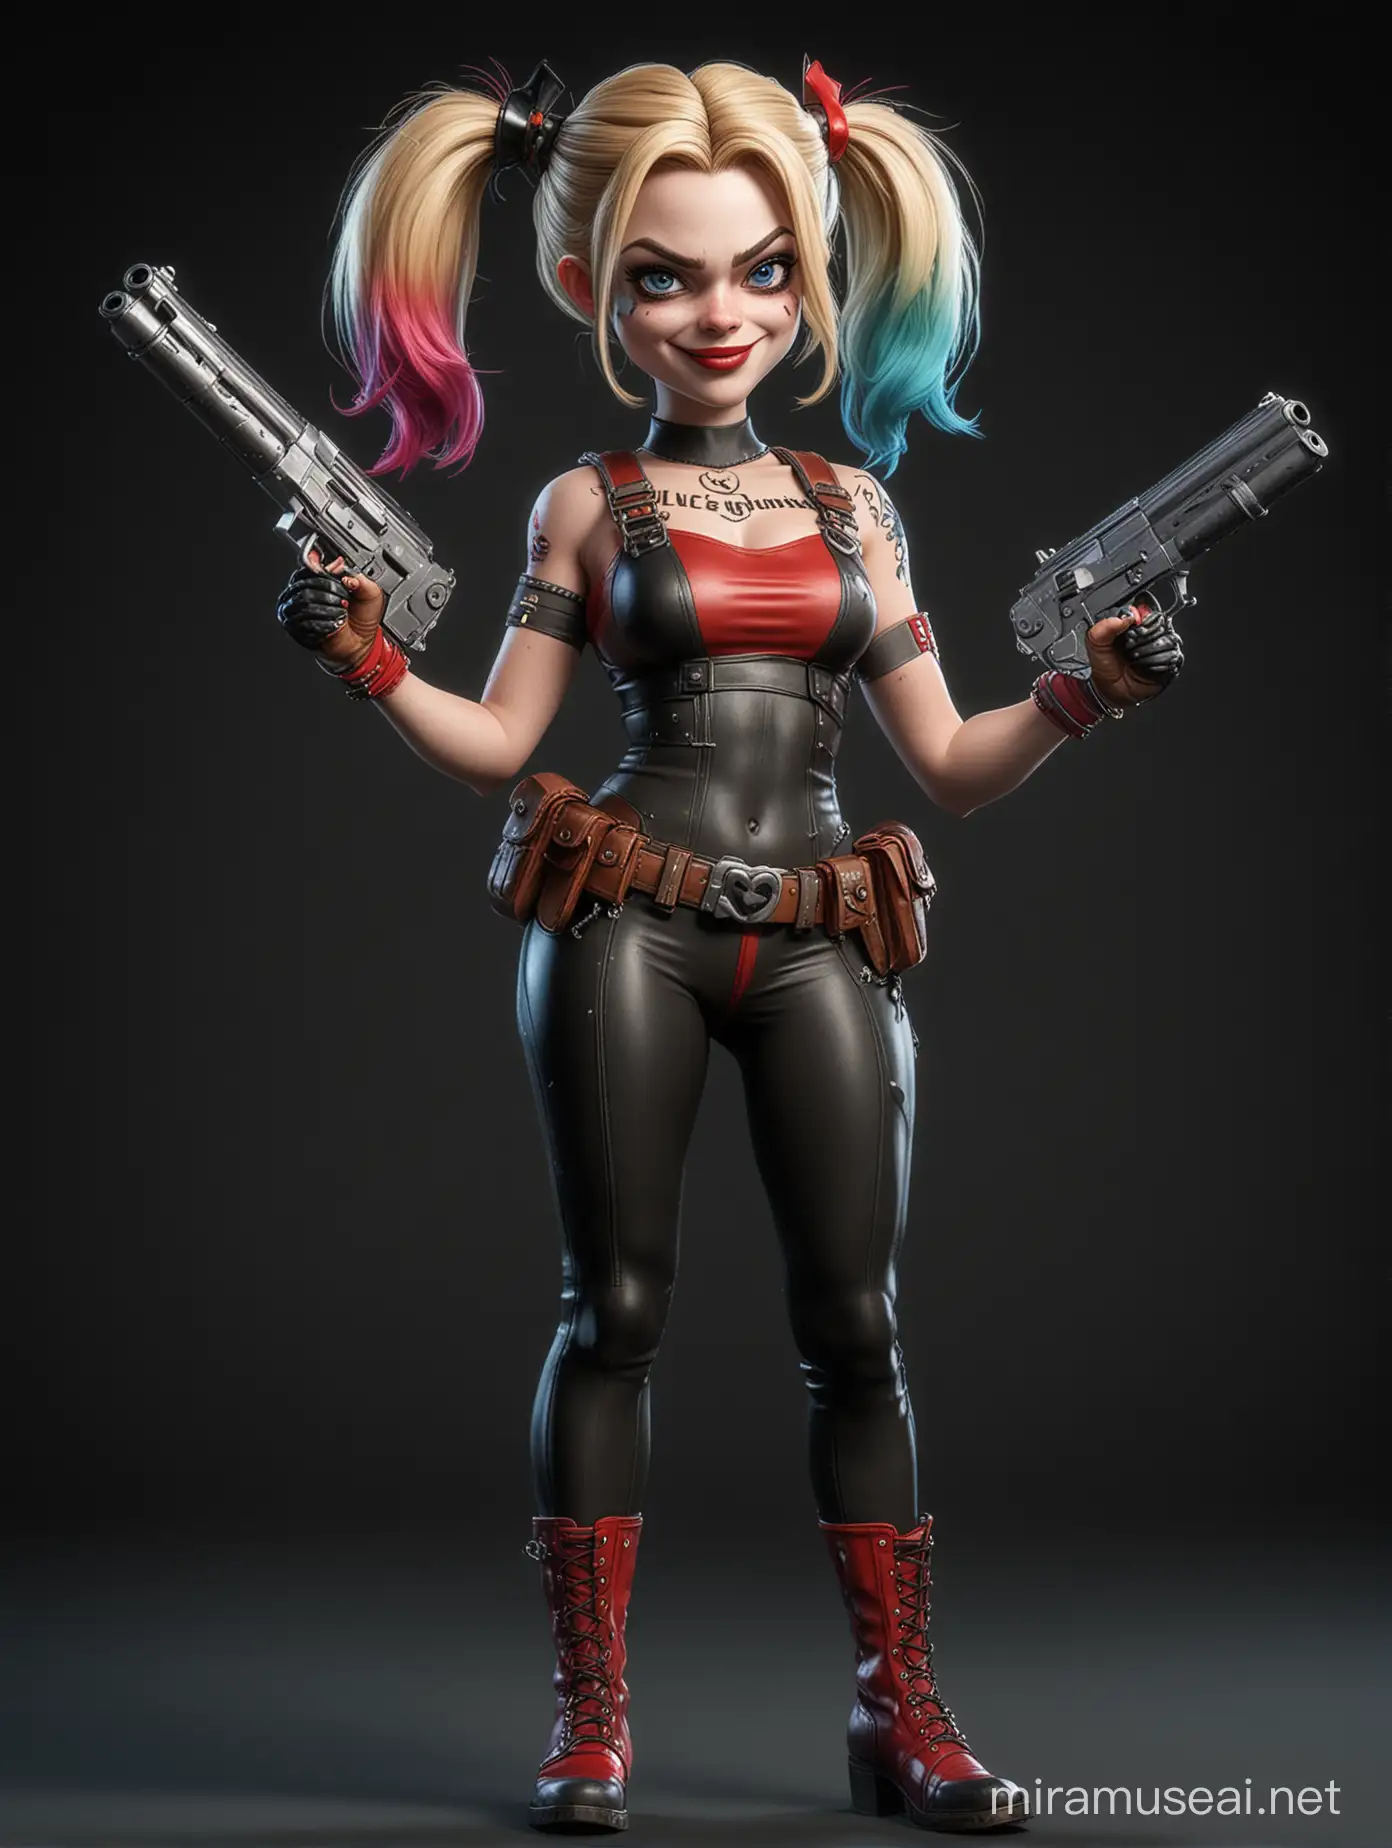 make a 3d animation caricature cartoon photo. Full body of cute
Harley Quinn holding 2 guns in both hands, black background, high contrast
